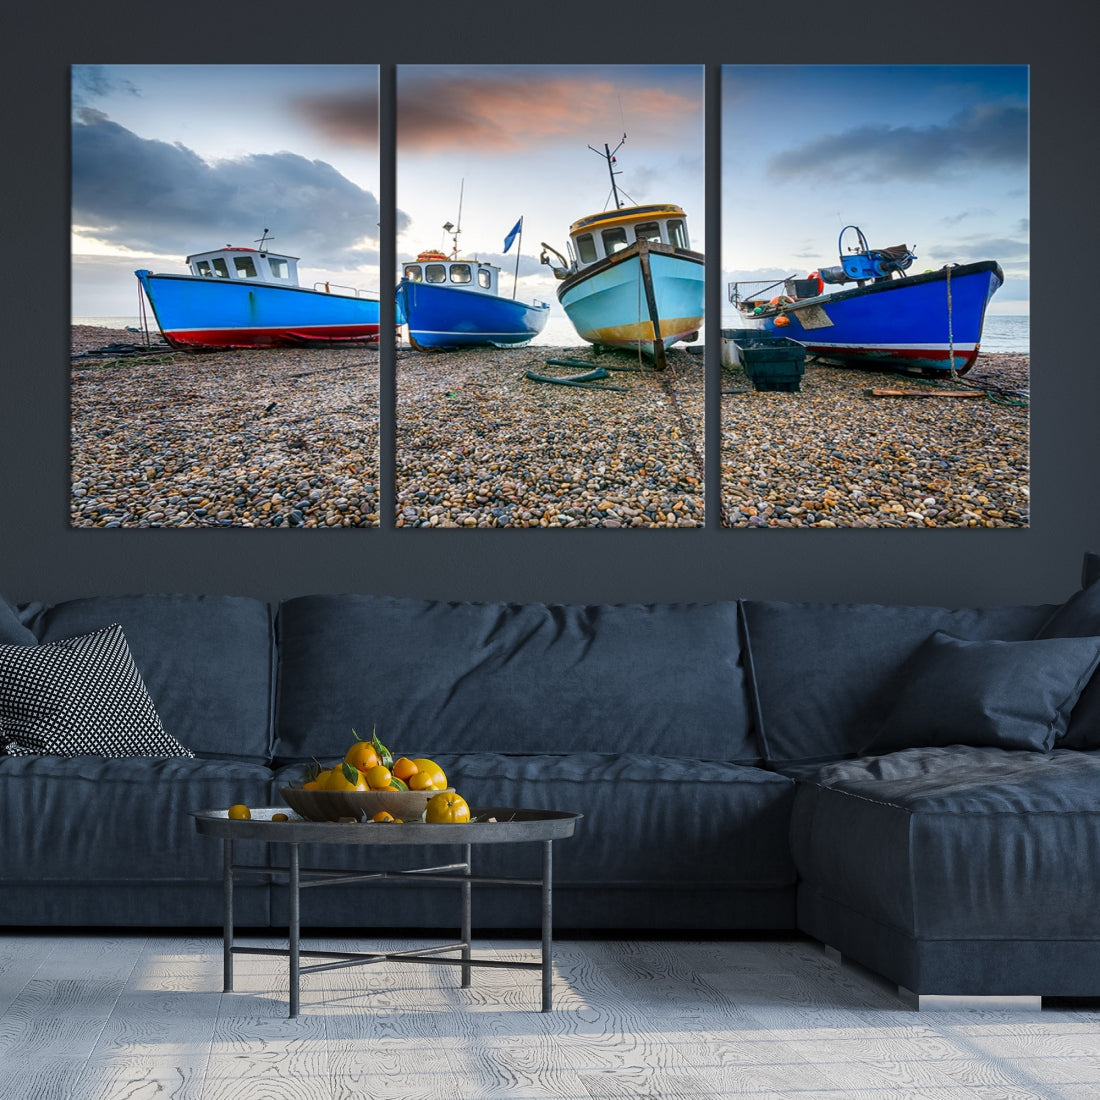 Colorful Boats On The Beach Large Wall Art Canvas Print Sailing Decor